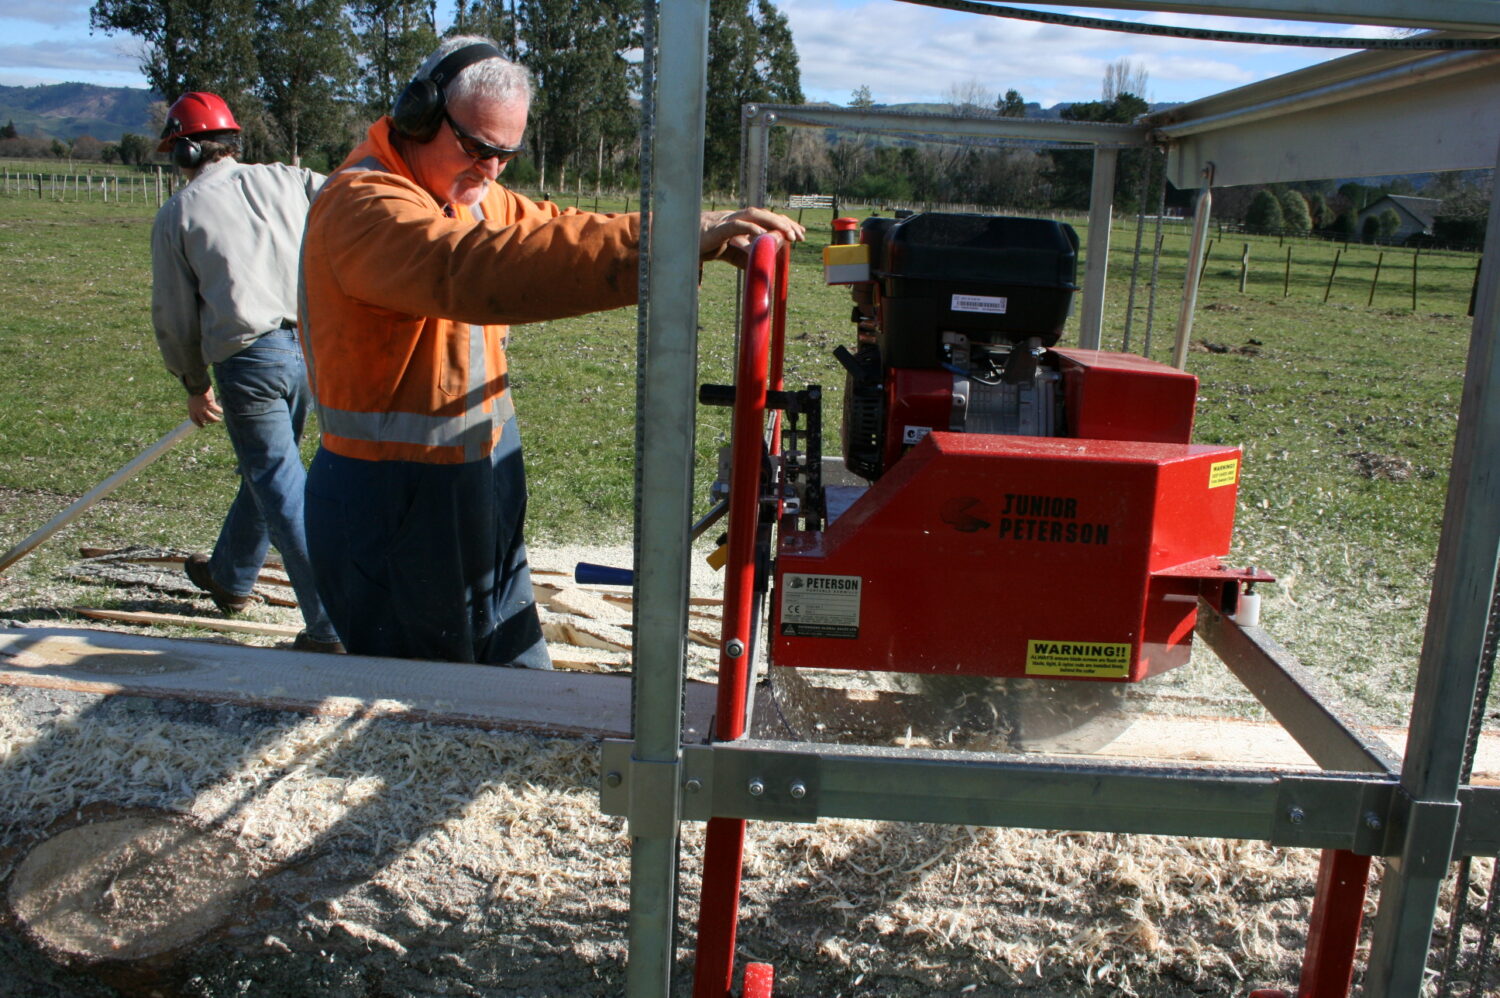 Junior Peterson Affordable Portable Sawmill